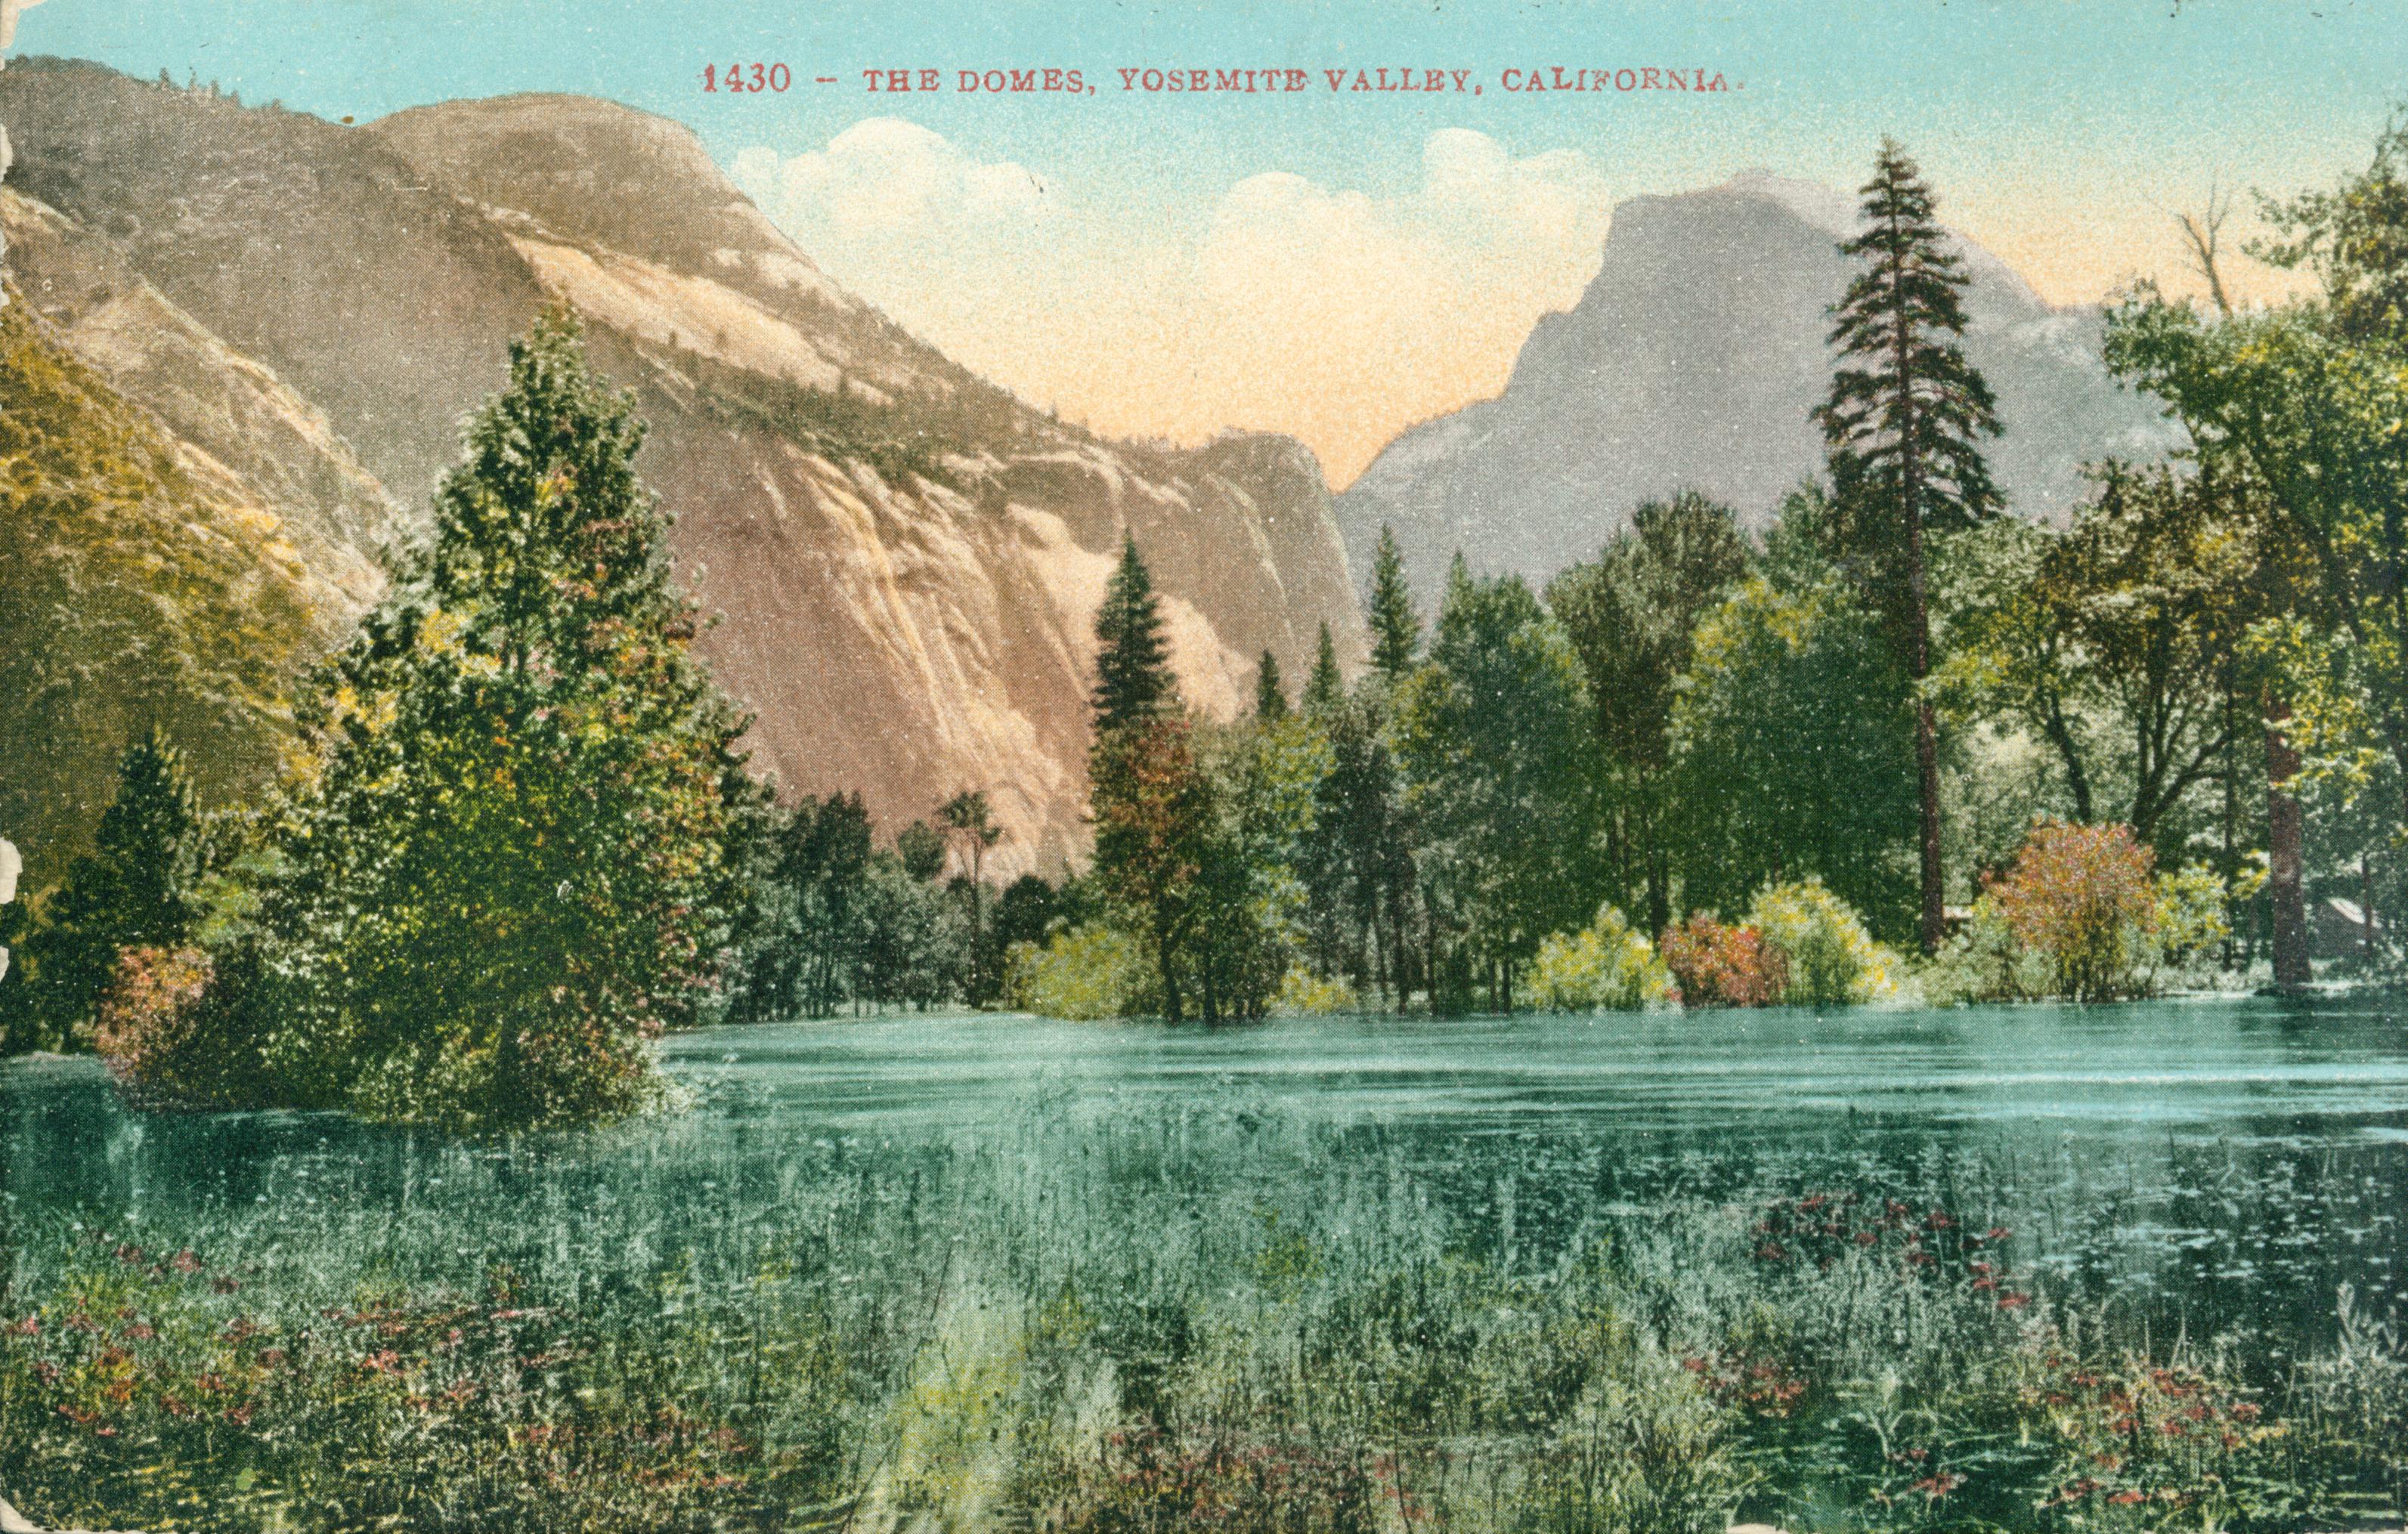 Shows a tree-lined lake or pond with the various rock formations including Half Dome in the background